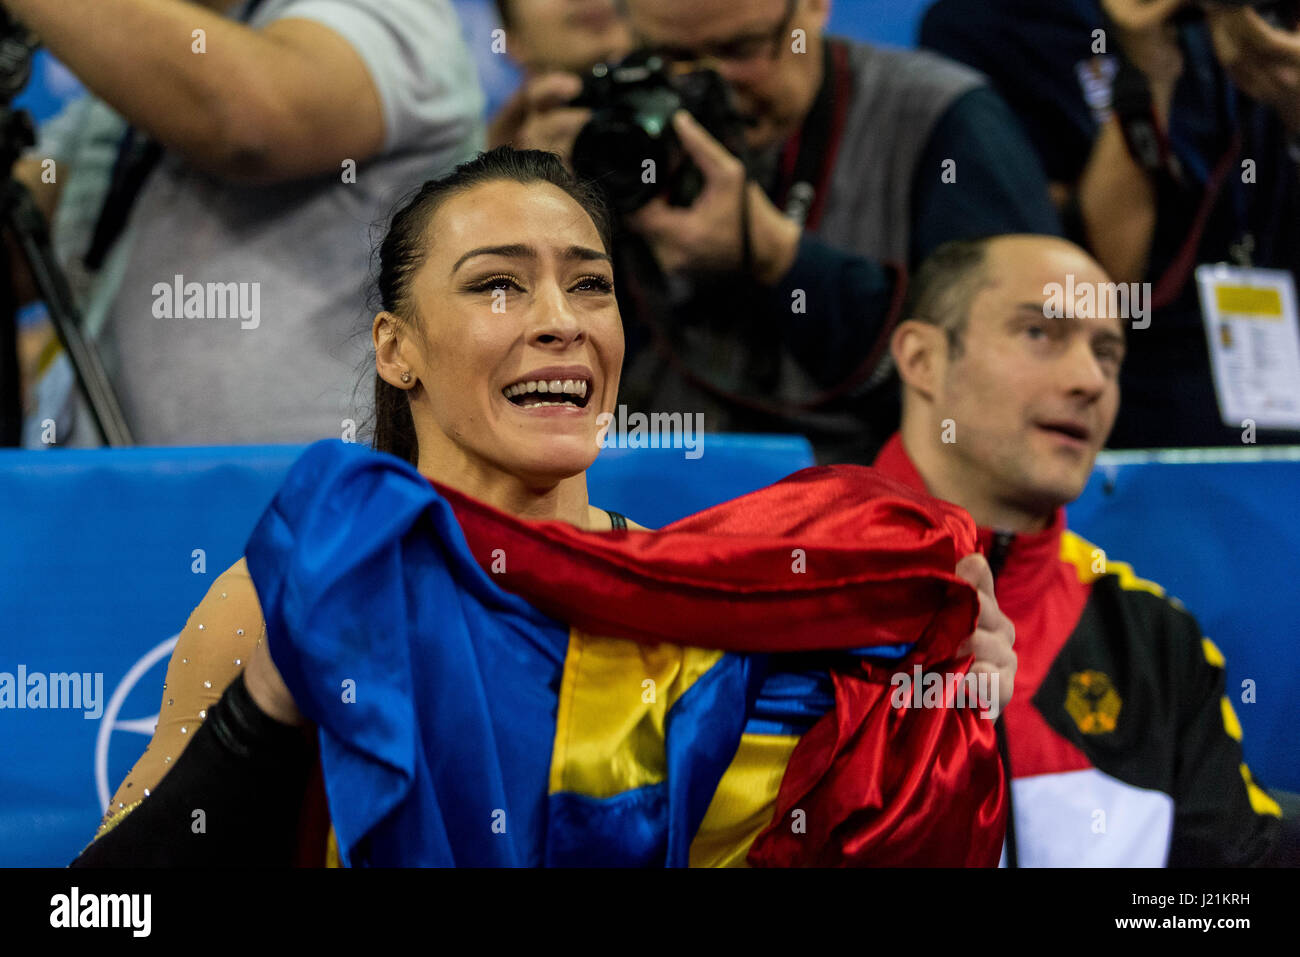 Cluj Napoca, Romania. 23rd Apr, 2017. Catalina Ponor (ROU) after his performance on the balance beam during the Women's Apparatus Finals at the European Men's and Women's Artistic Gymnastics Championships in Cluj Napoca, Romania. 23.04.2017 Photo: Catalin Soare/dpa/Alamy Live News Stock Photo